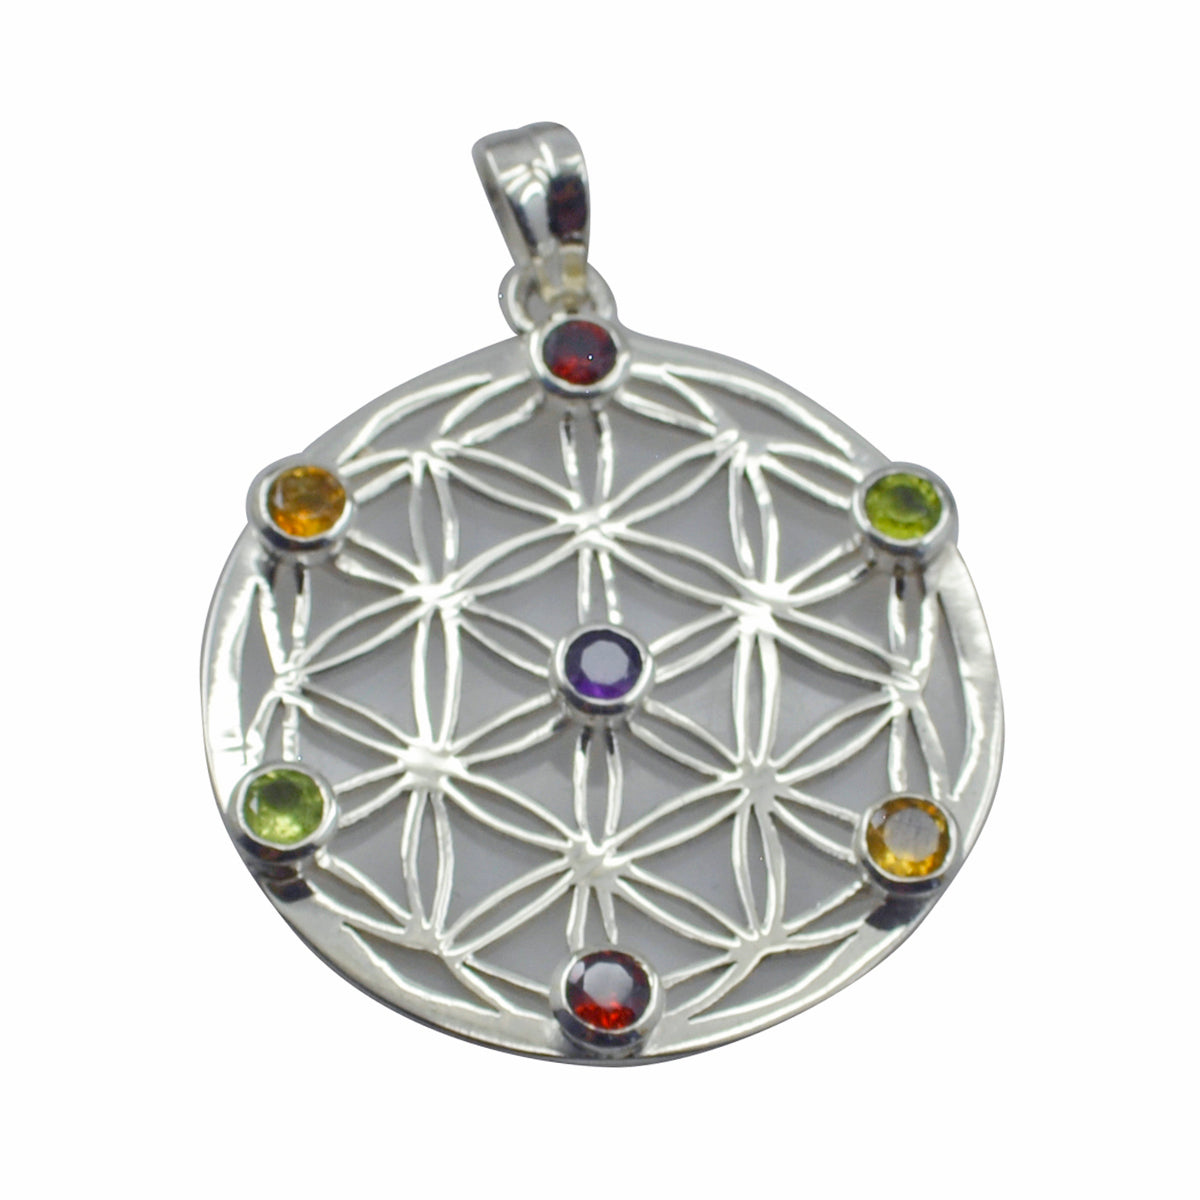 Riyo Genuine Gemstone Round Faceted Multi Color Multi Stone 1019 Sterling Silver Pendant Gift For Teachers Day